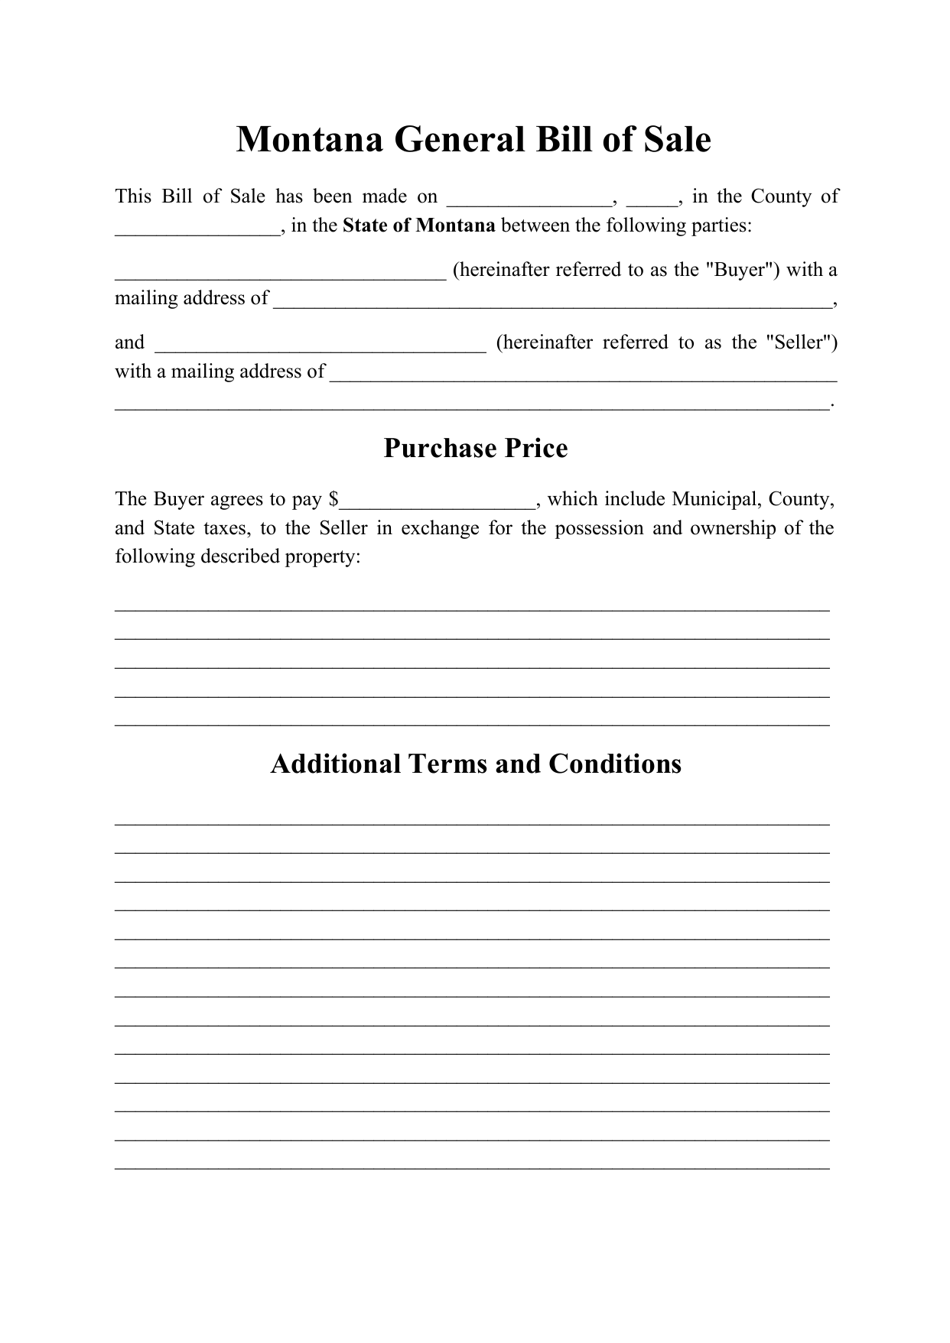 Generic Bill of Sale Form - Montana, Page 1